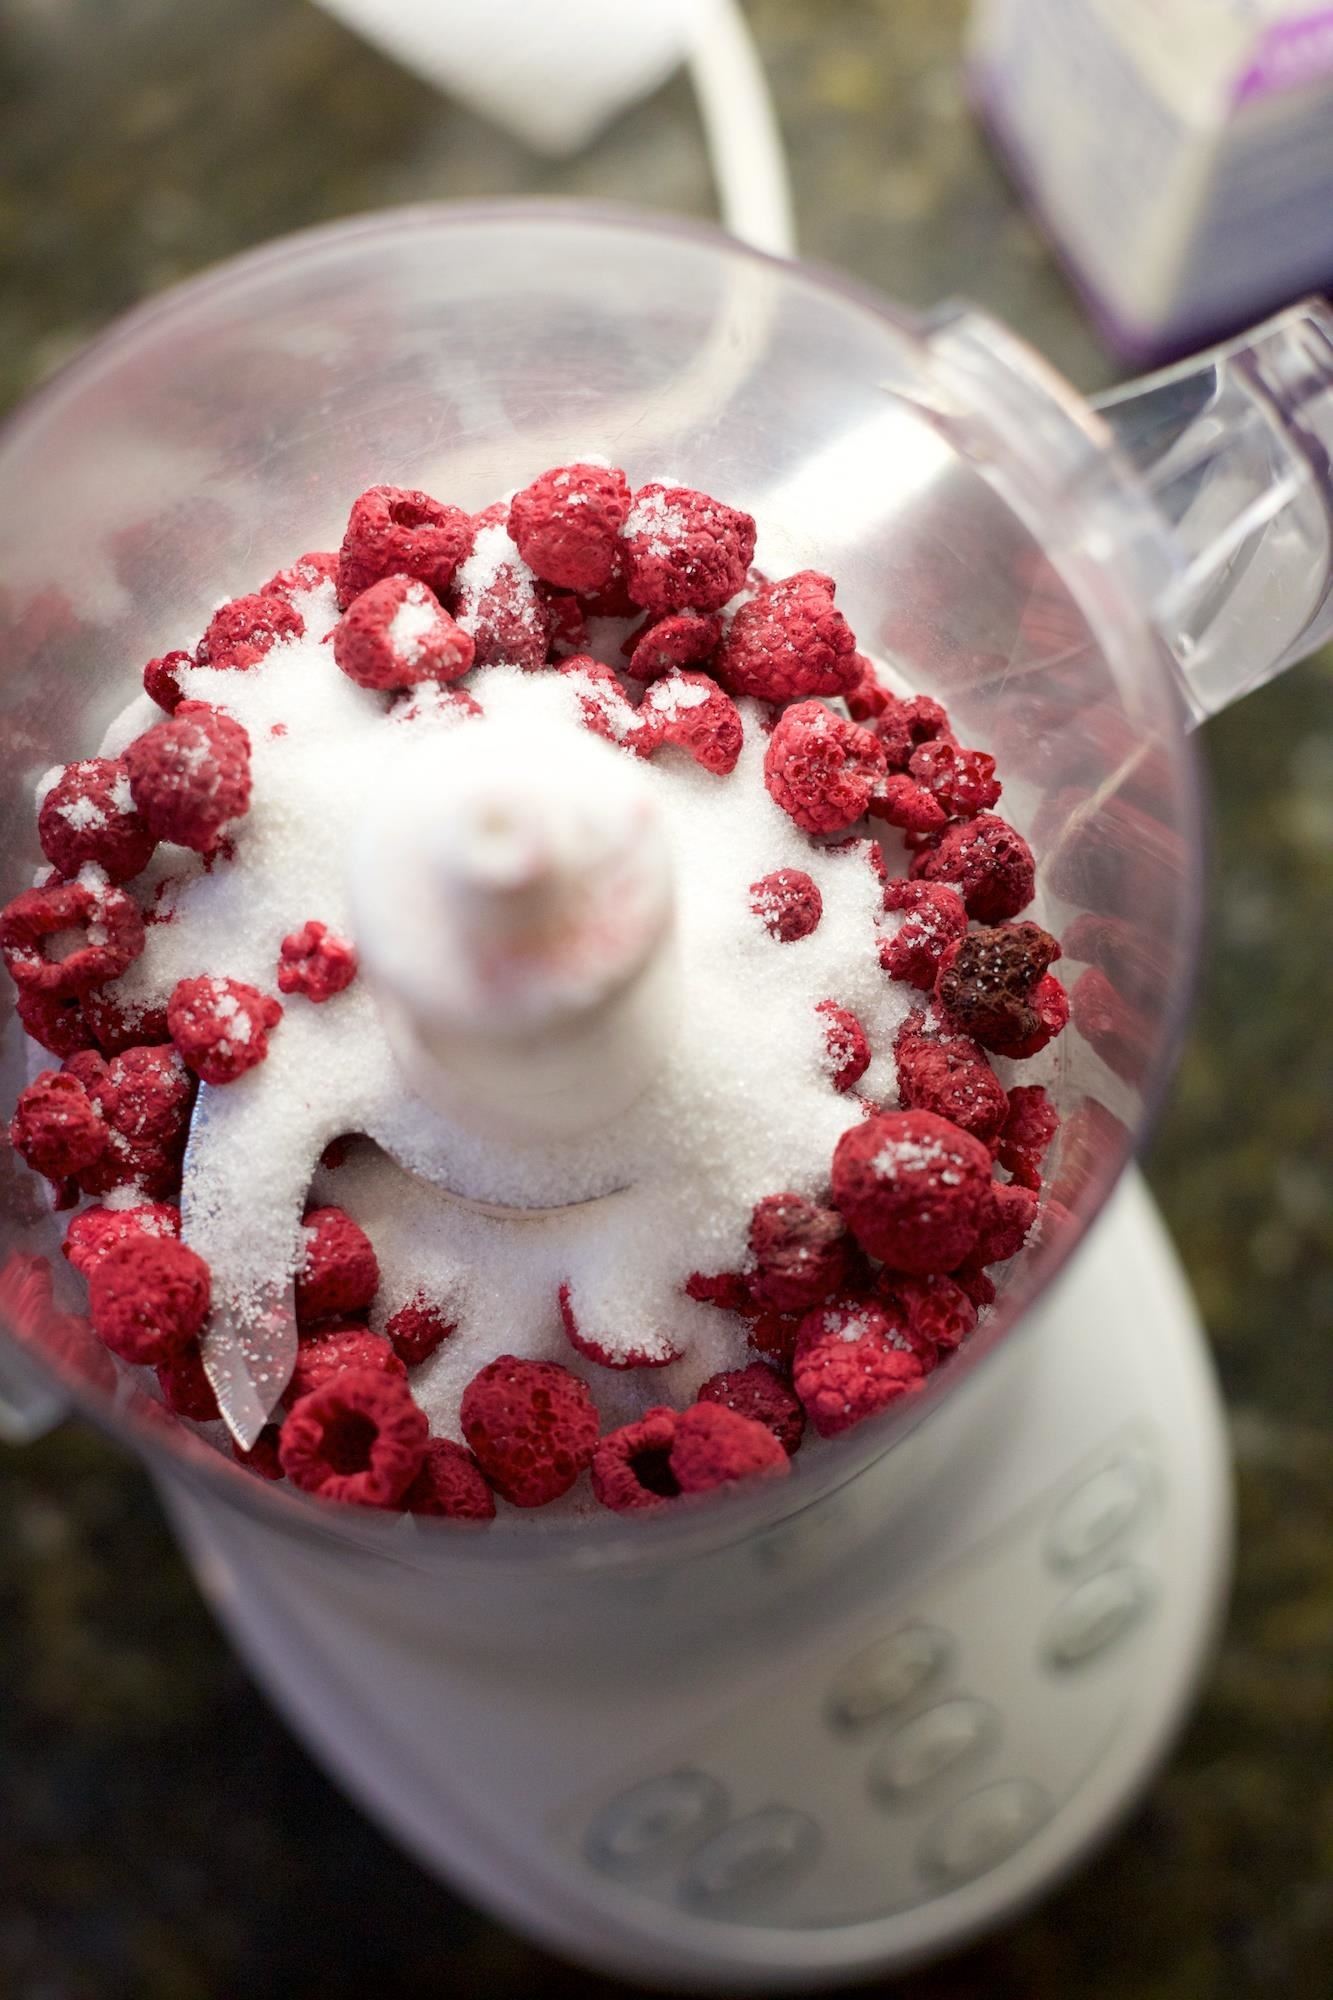 Flavorful & Intense Whipped Cream Is Simple with Freeze Dried Fruit